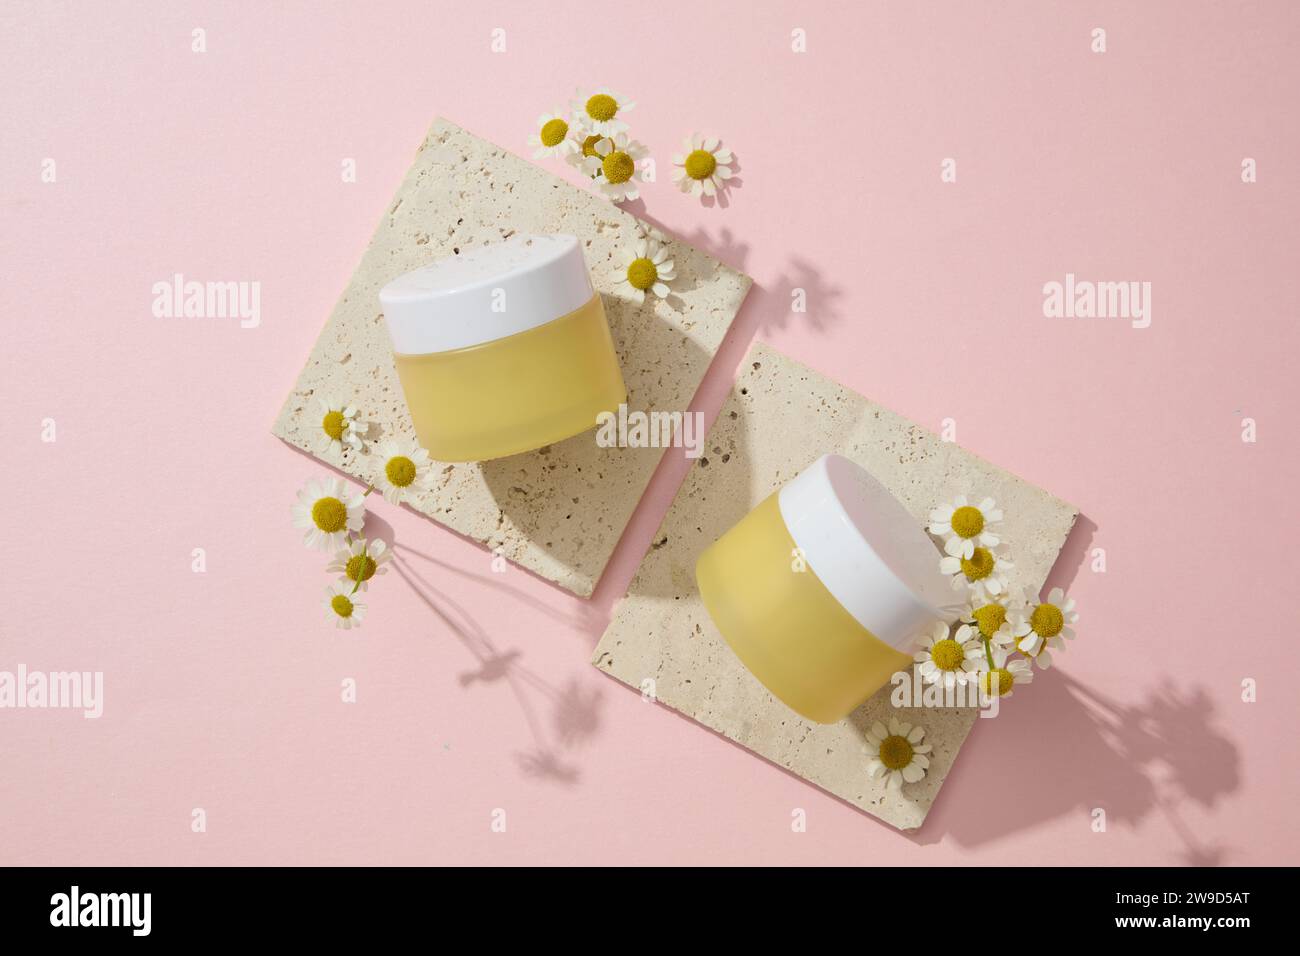 Against the pink background, two yellow cream jars displayed on brick podiums with chamomilla flowers. Mockup scene for advertising cosmetics with moi Stock Photo